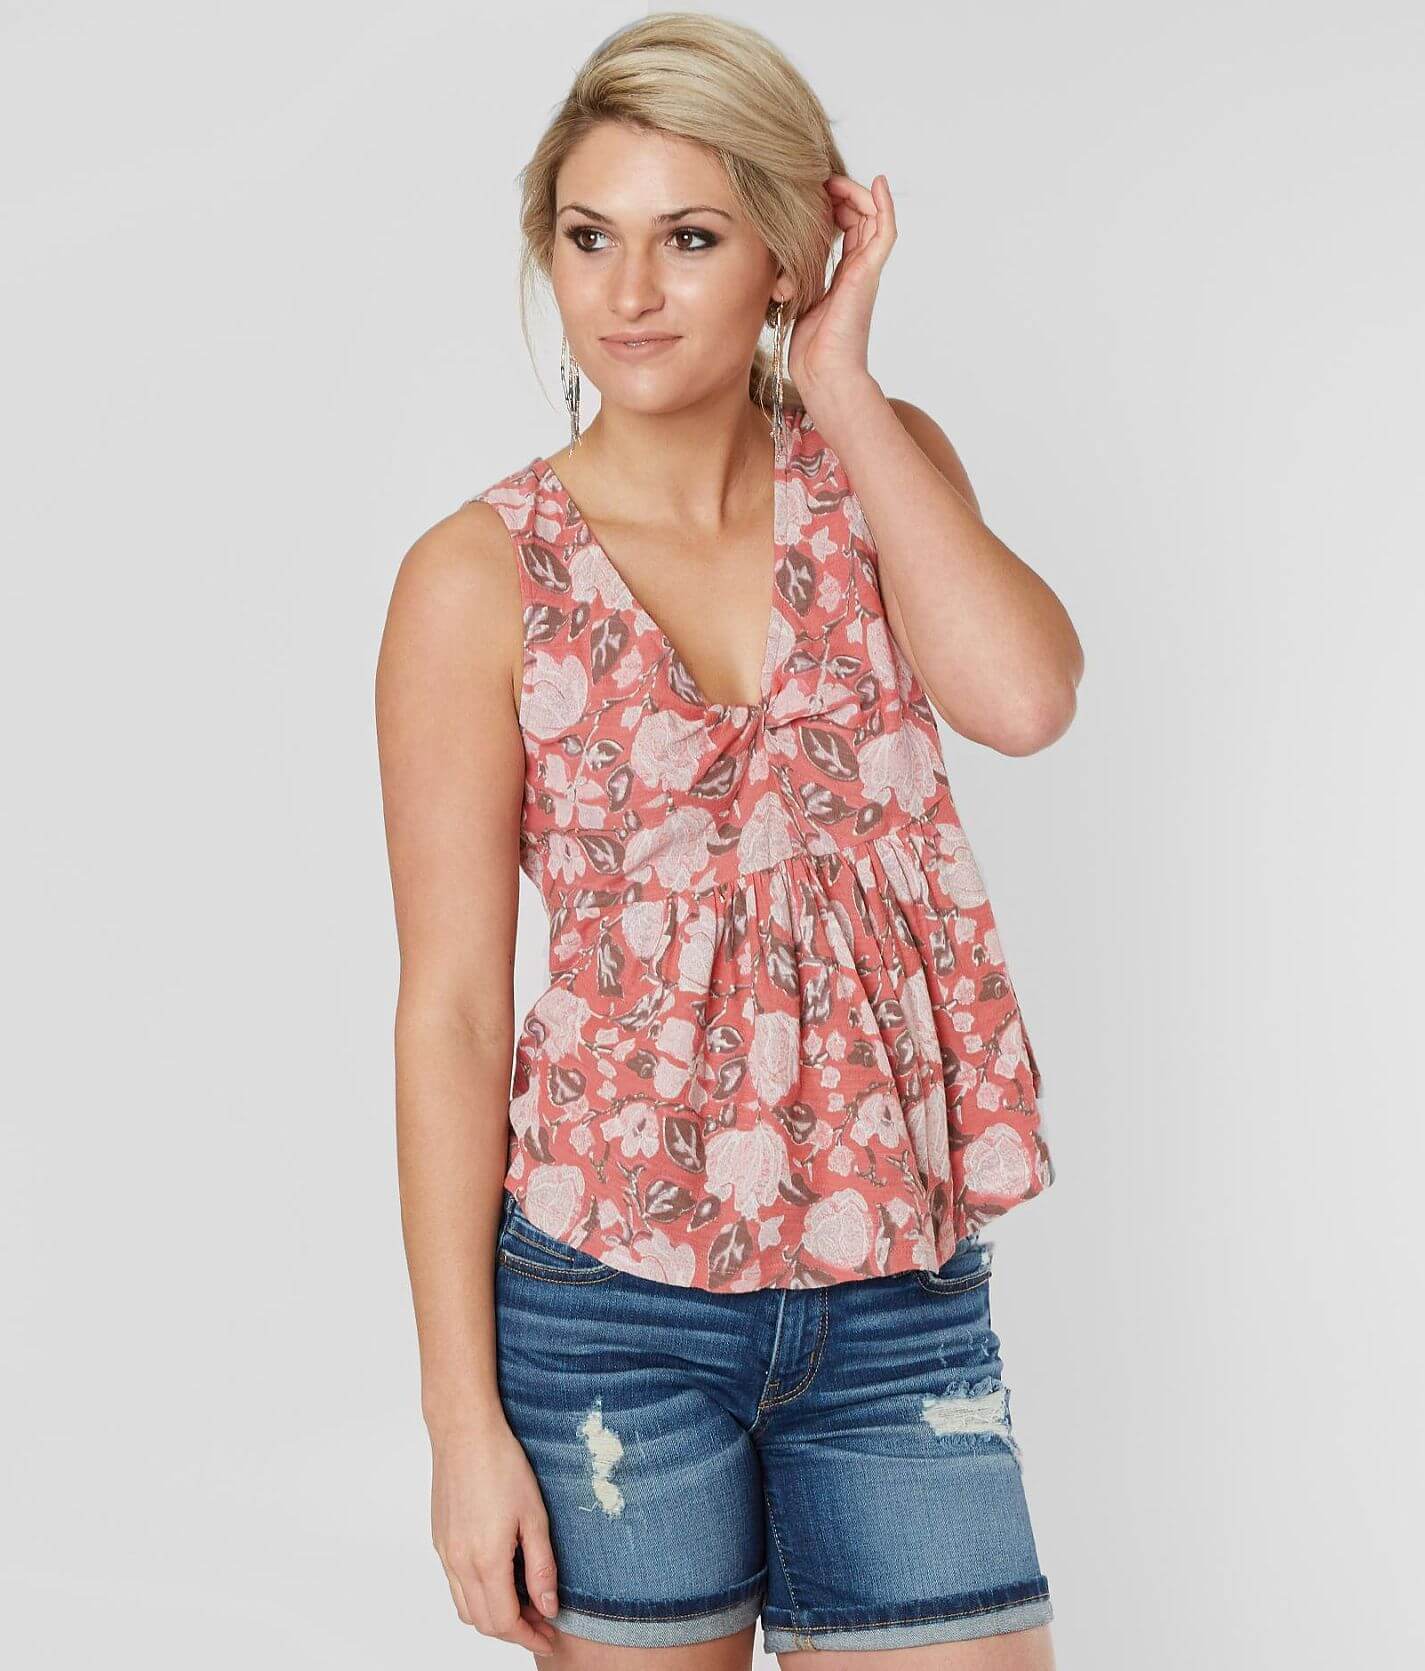 Lucky Brand Floral Peplum Tank Top - Women's Tank Tops in Coral Multi